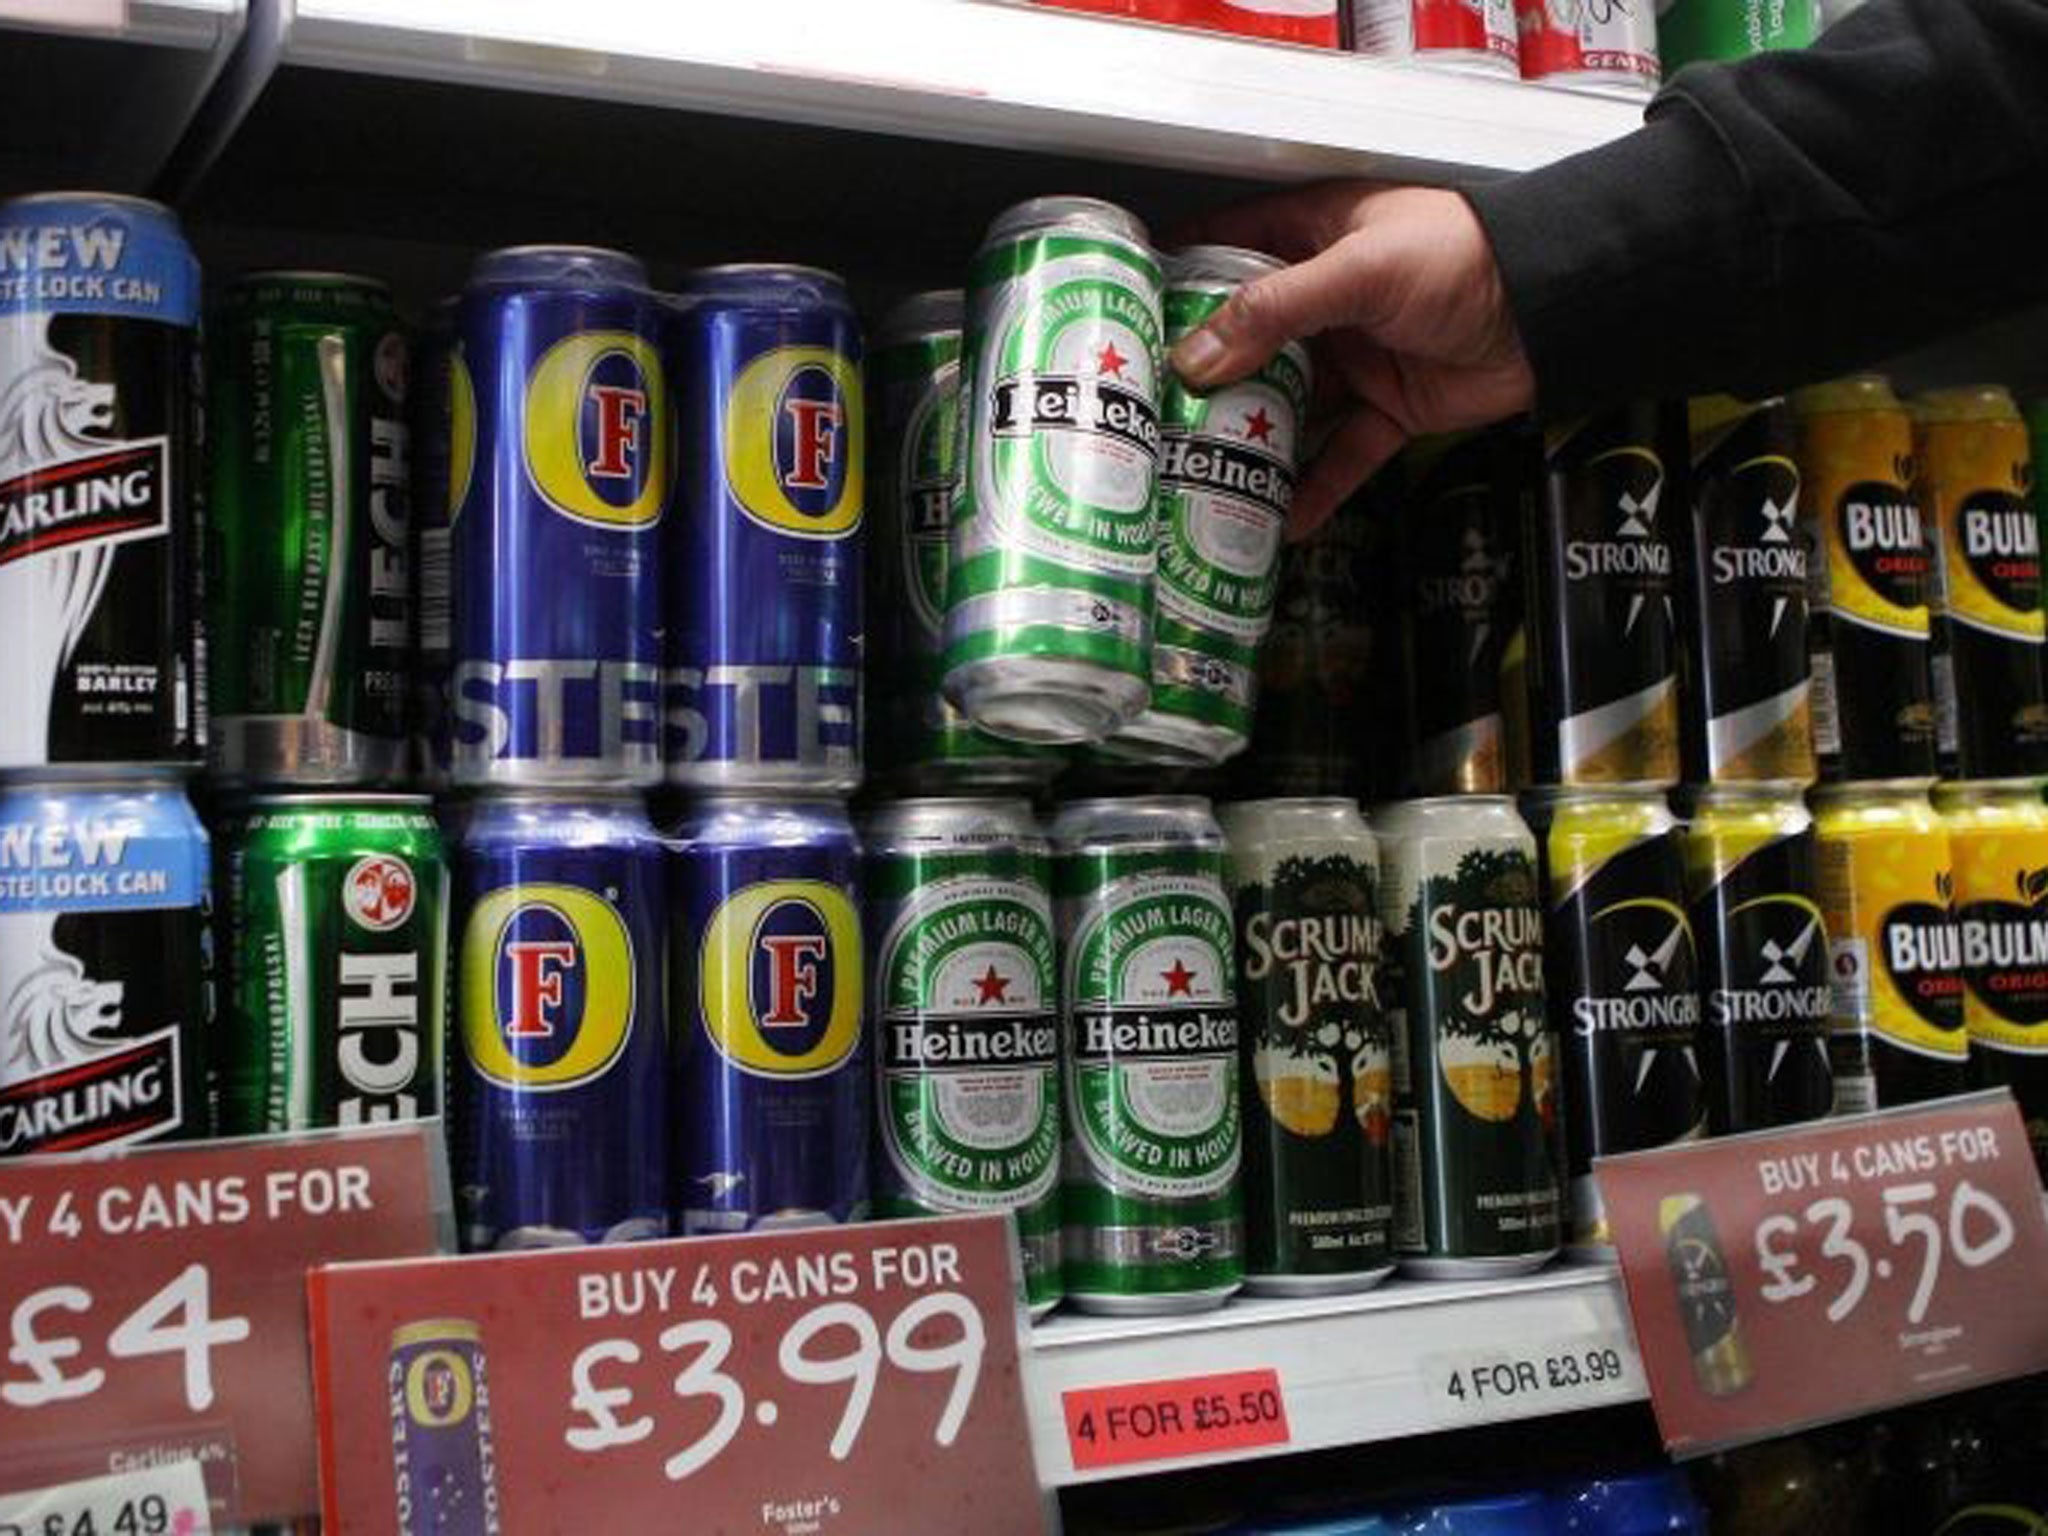 Plans to introduce minimum pricing on alcohol have now been shelved by the Government